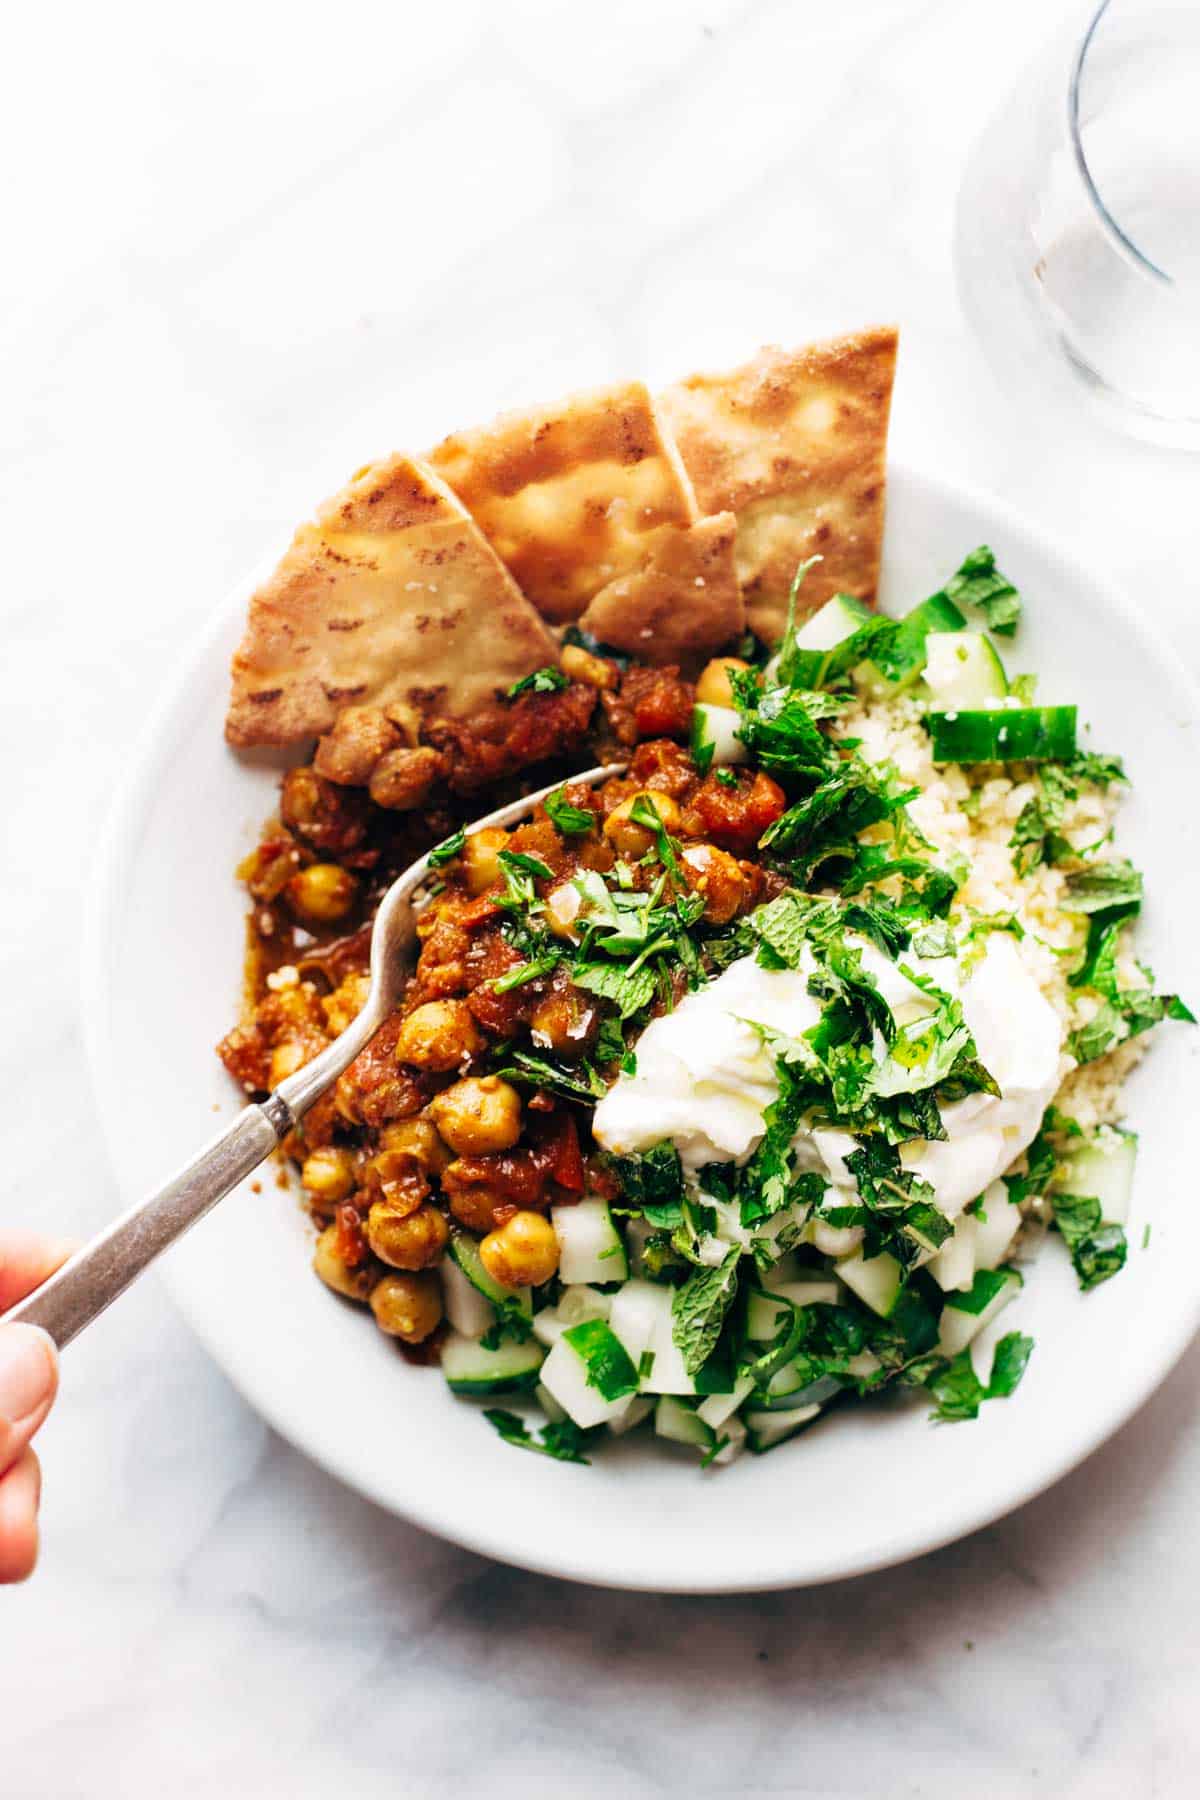 These 15 Vegetarian Recipes Are So Satisfying You’ll Want to Go Meatless for an Entire Month! Now I have some healthy veggie recipes to try for breakfast, lunch, and dinner like this Moroccan Chickpea Bowl!